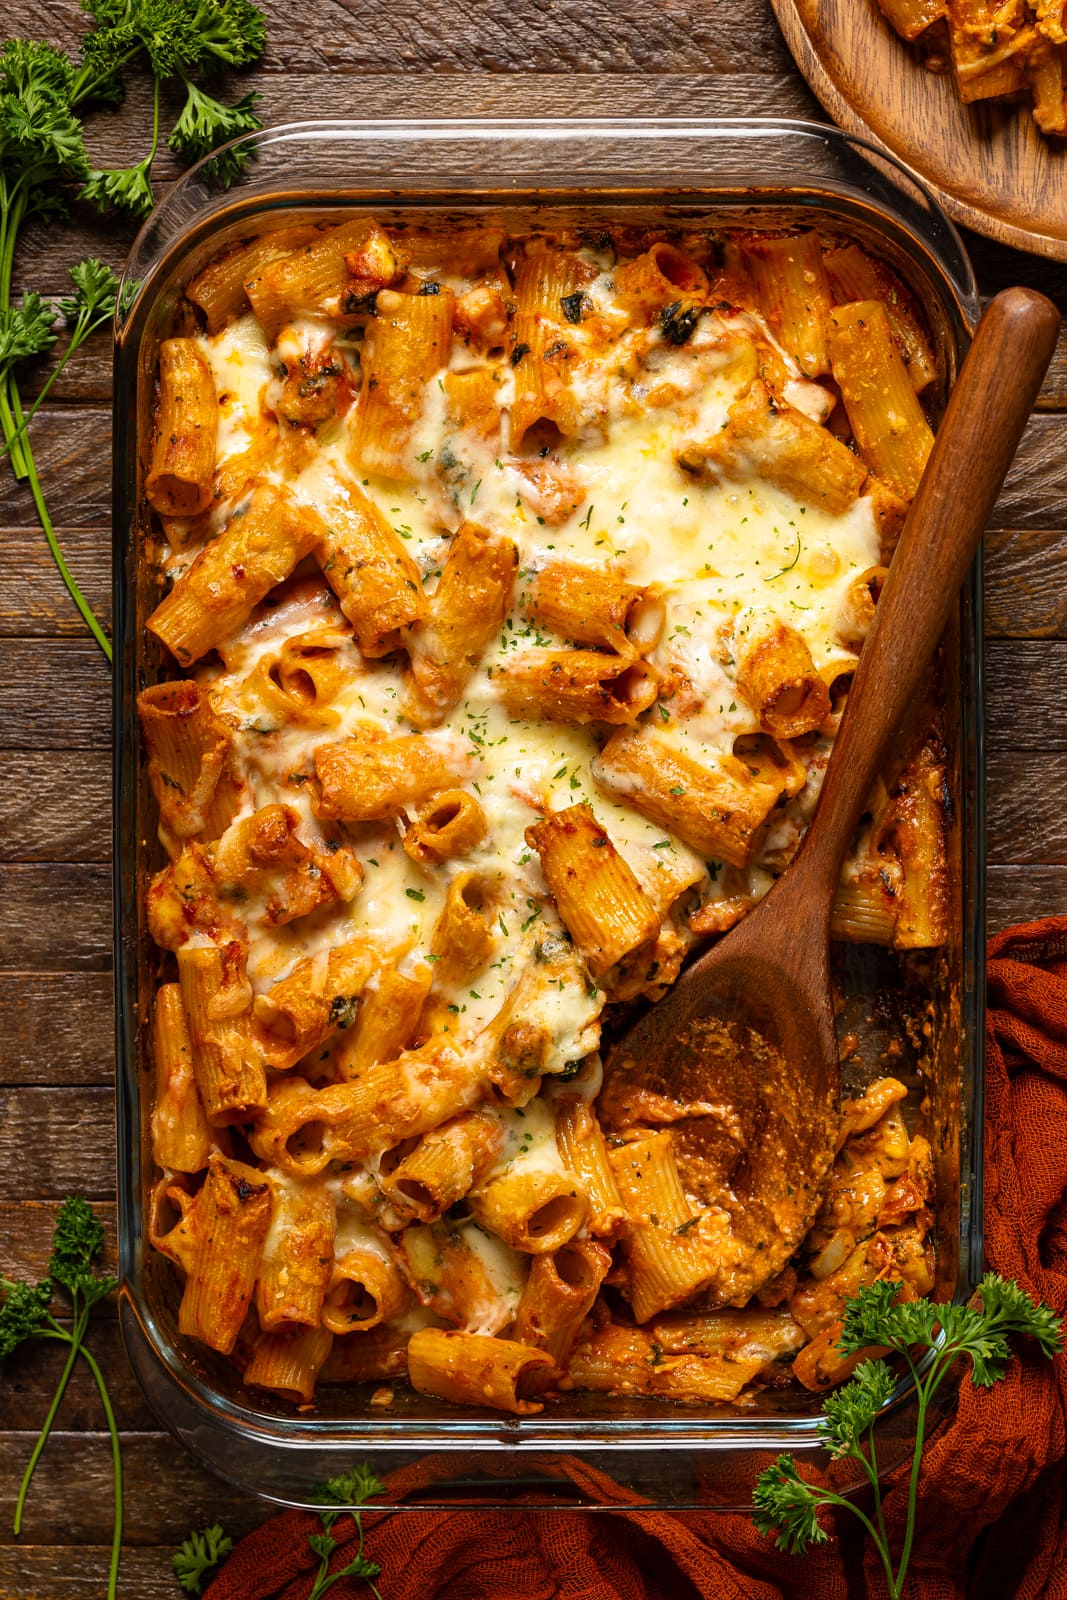 Baked pasta on a wooden brown table with a scoop from a spoon.